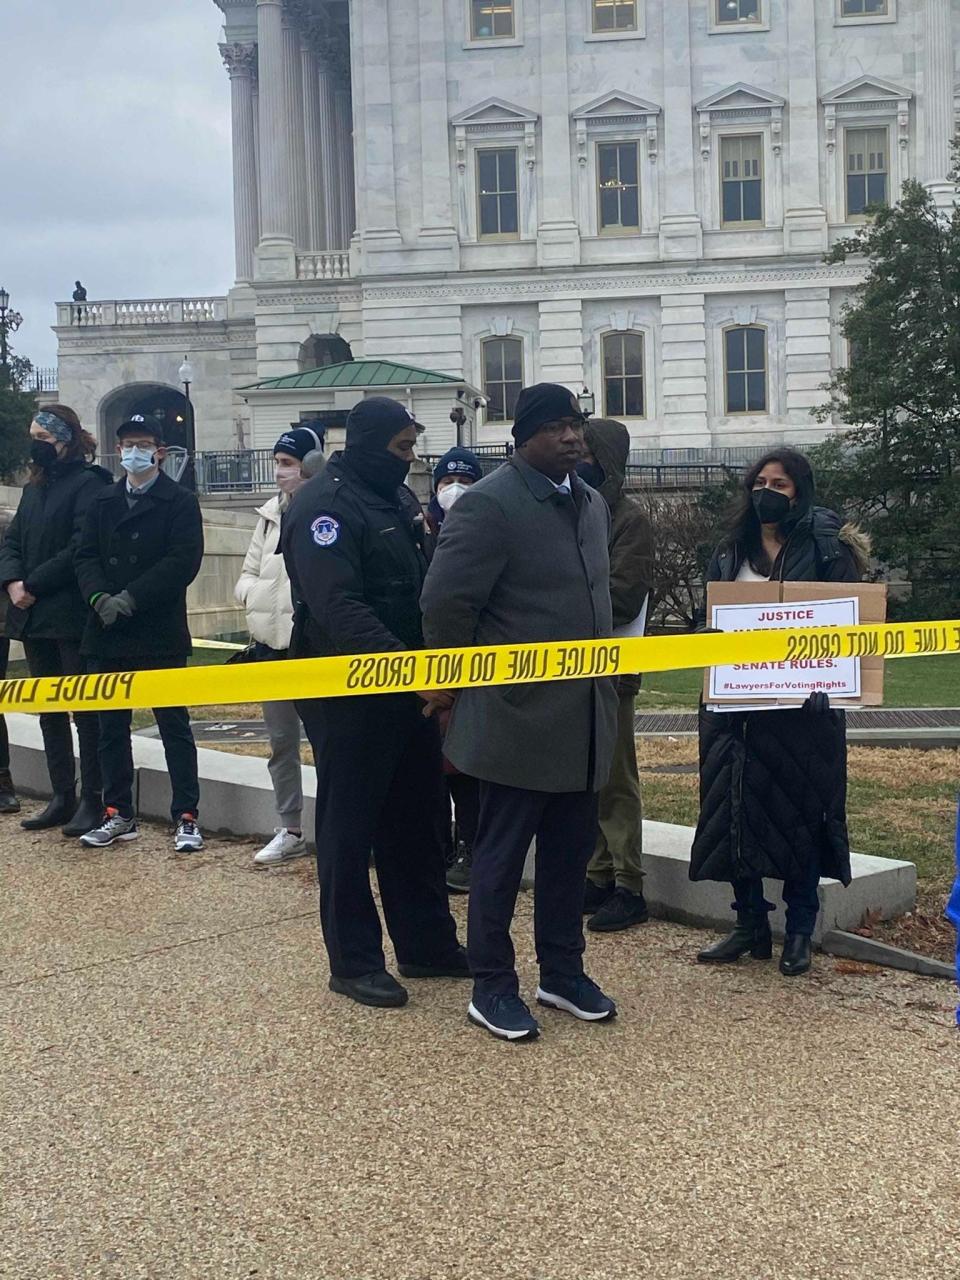 Rep. Jamaal Bowman was arrested during a protest outside the U.S. Capitol Building Thursday. Bowman represents New York's 16th congressional district.